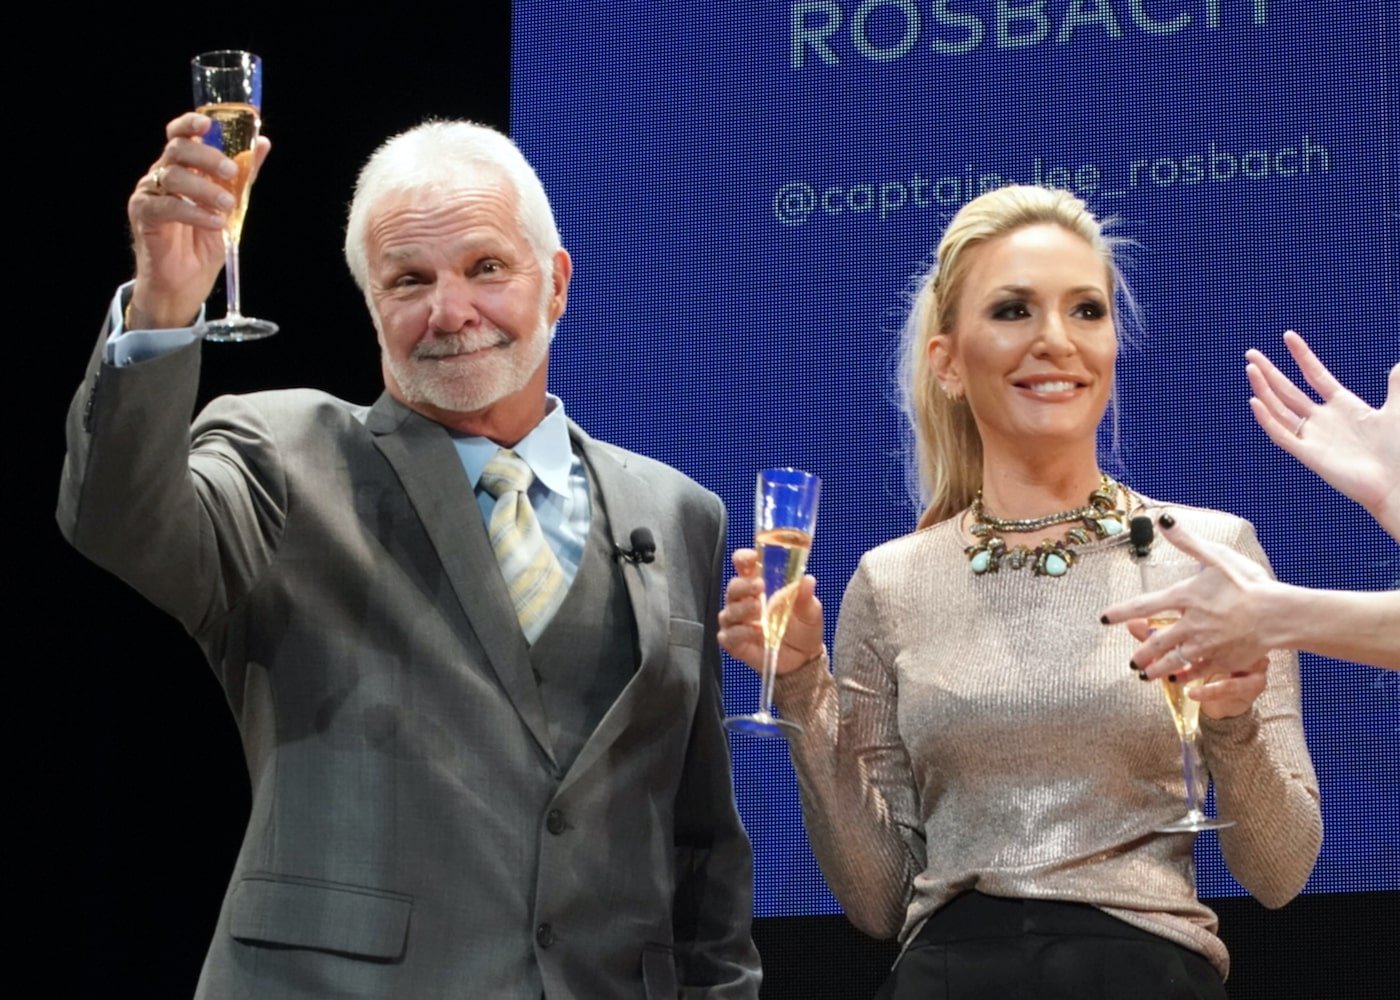 Captain Lee Rosbach and Kate Chastain from 'Below Deck' toast at BravoCon